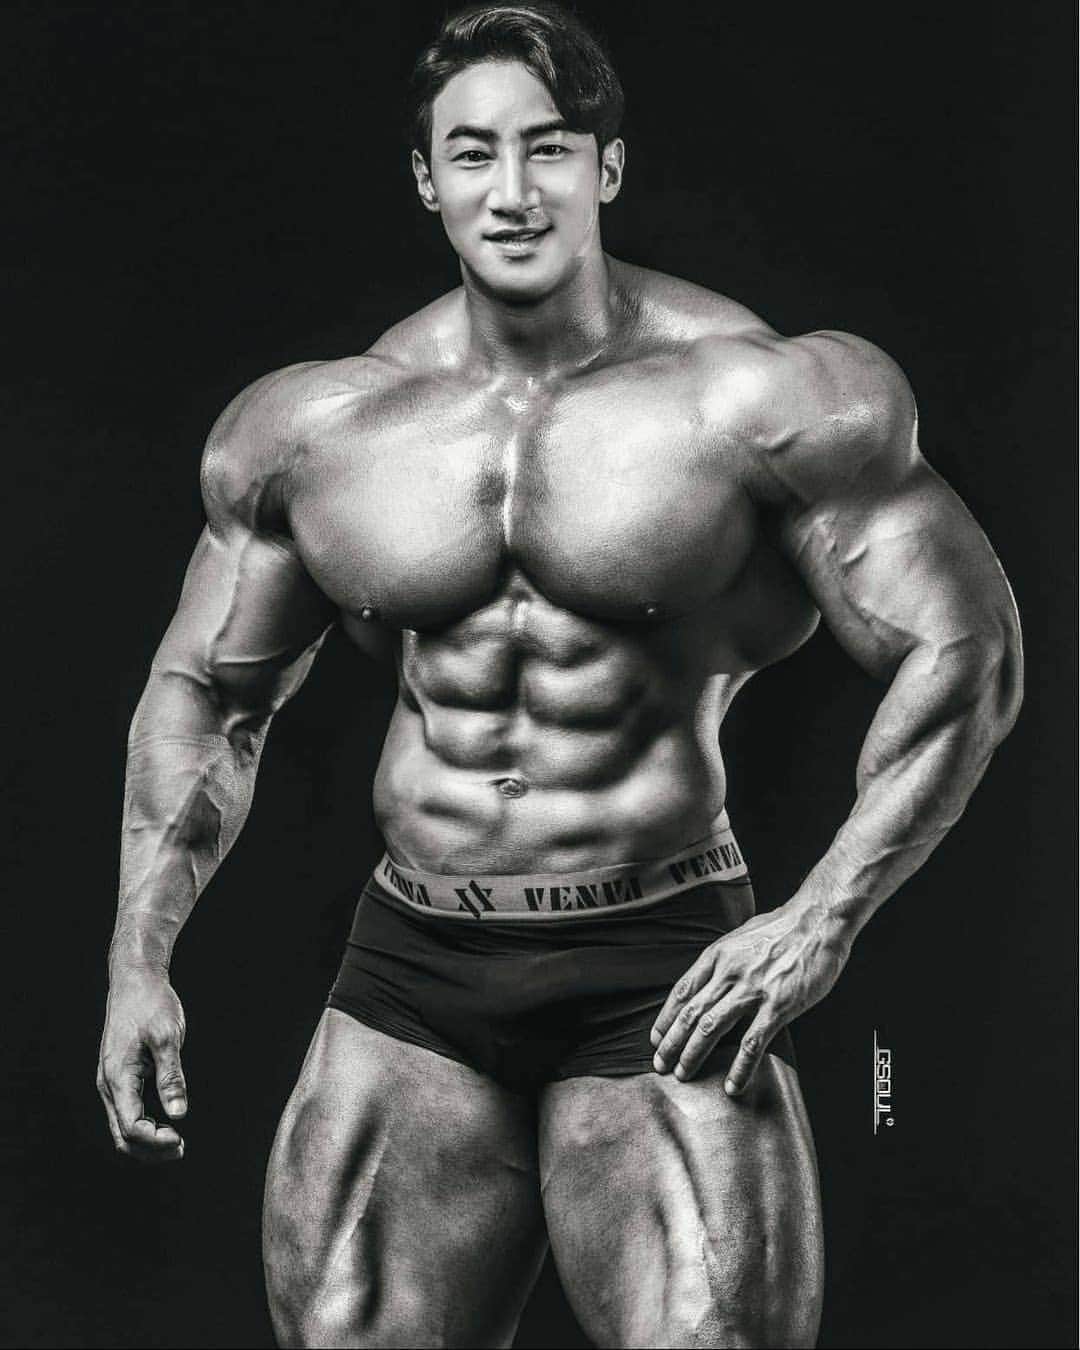 CHUL SOONのインスタグラム：「Mass . . . Image by @gsoulgraphy . Huge training Program available at chulsoon.com  Follow the Facebook page to see work outs.  Facebook.com/chulsoonofficial @chul_soon @chulsoon_official (한국계정)  ______________________________ #Musclemania Pro #teamchuls makeup #bear #teddybear #cutebear #fitness #chulsoon #korean #fitnessmodel  #aesthetic #aesthetics #wbff #ifbb #chulsoon2020 #motivation  #fitfam  #다이어트 #식단」